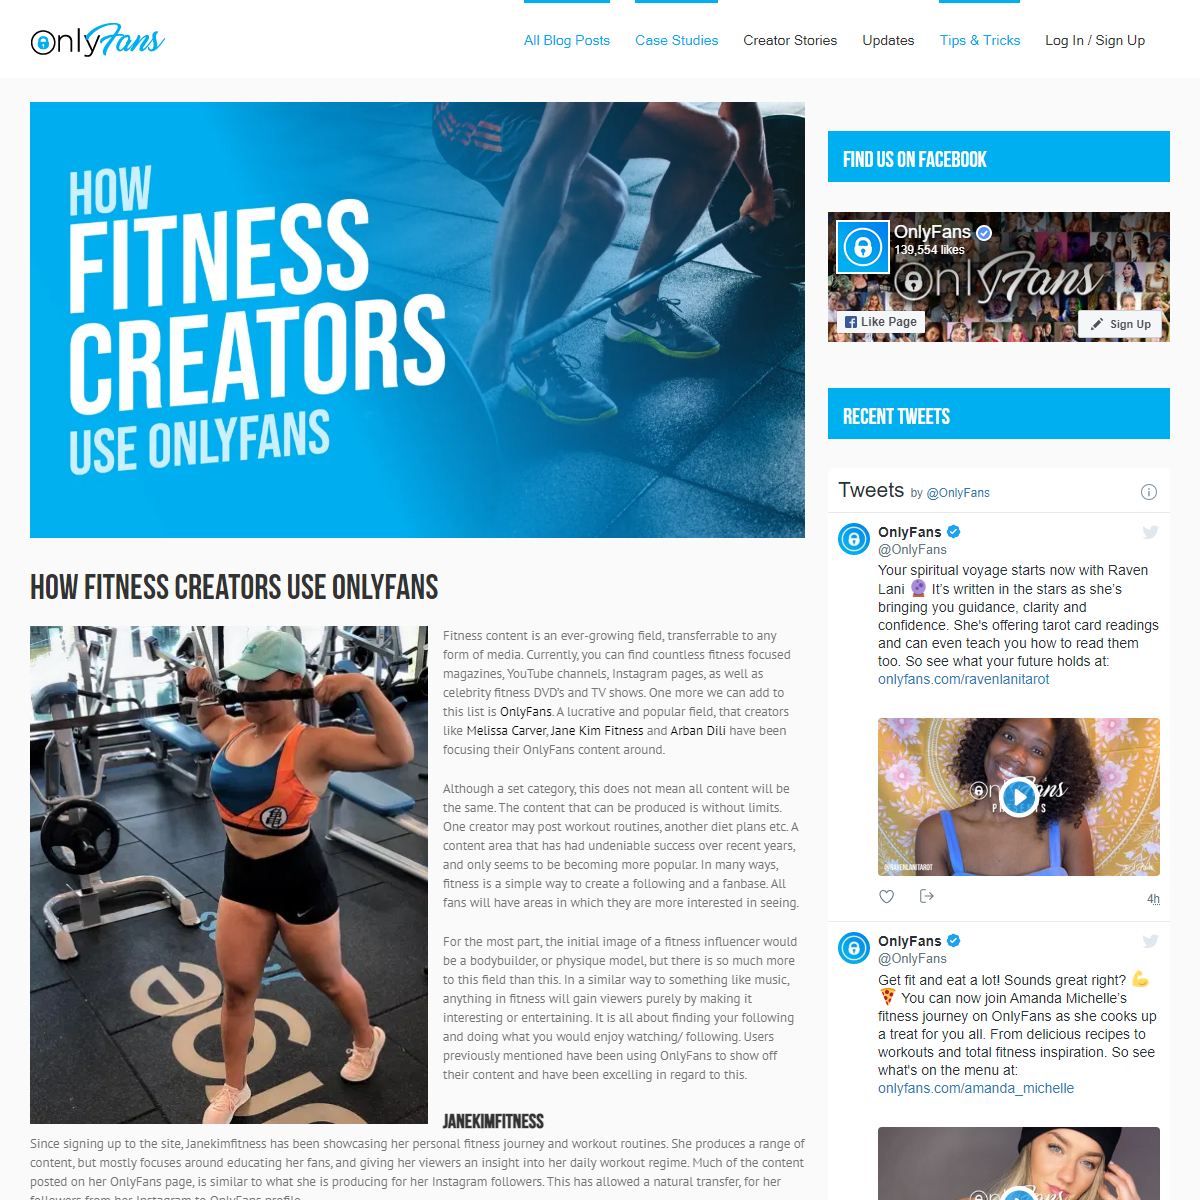 A complete backup of https://blog.onlyfans.com/how-fitness-creators-use-onlyfans/